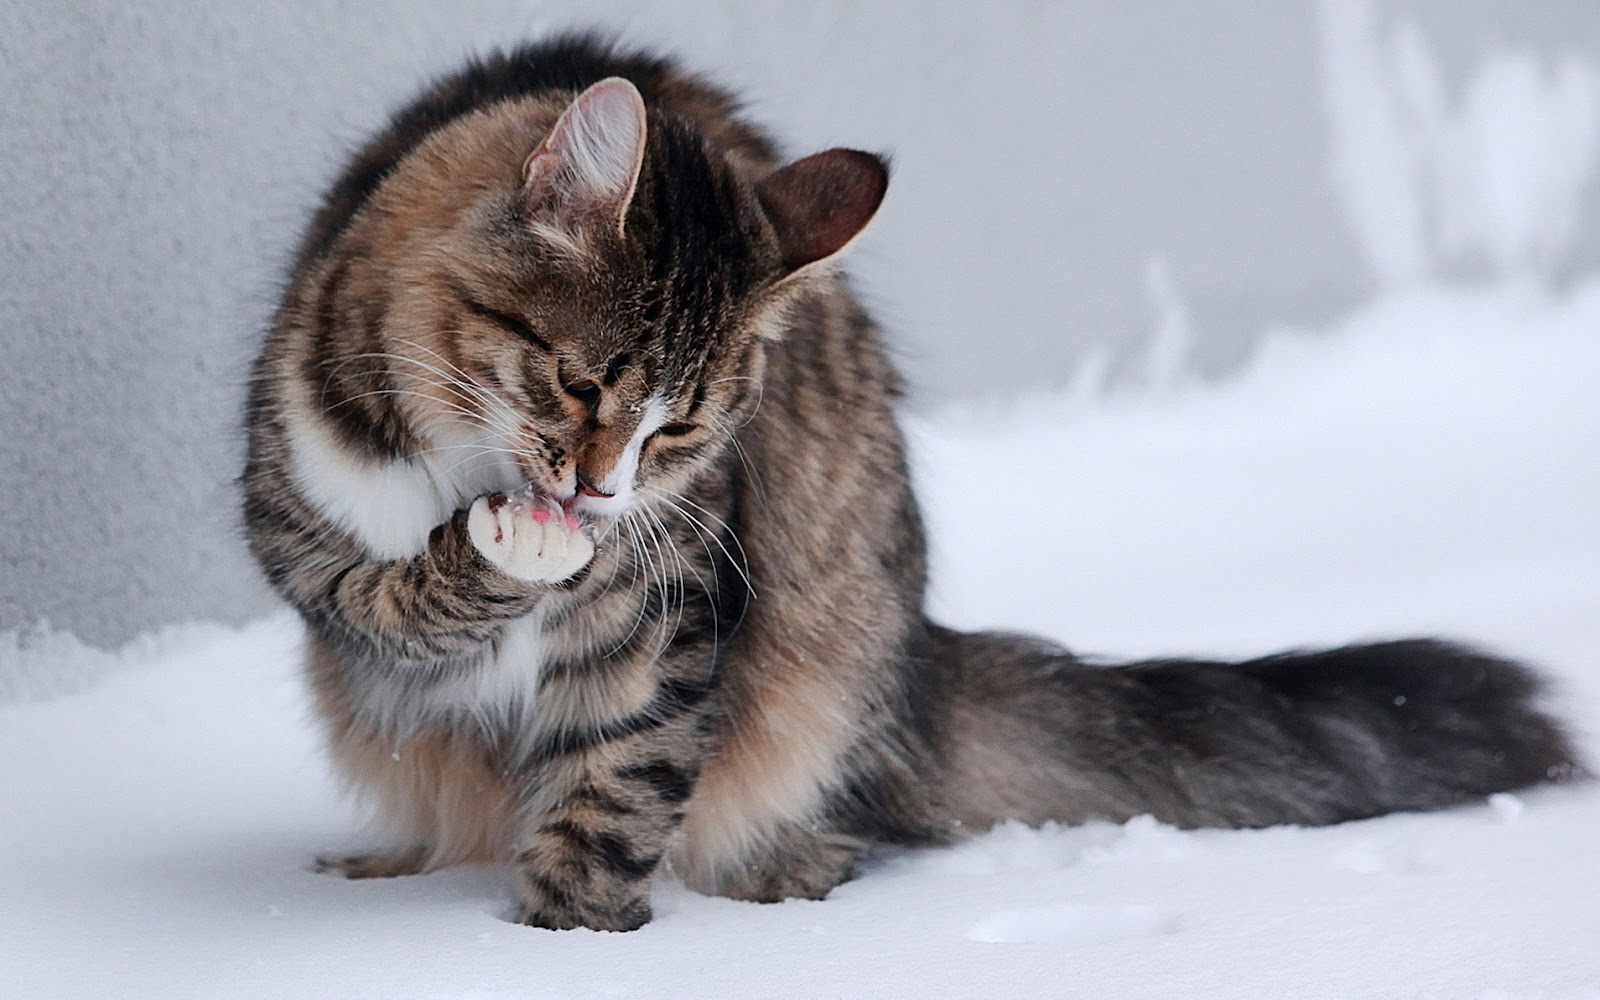 Cat Wallpaper With A Sitting In The Snow HD Winter